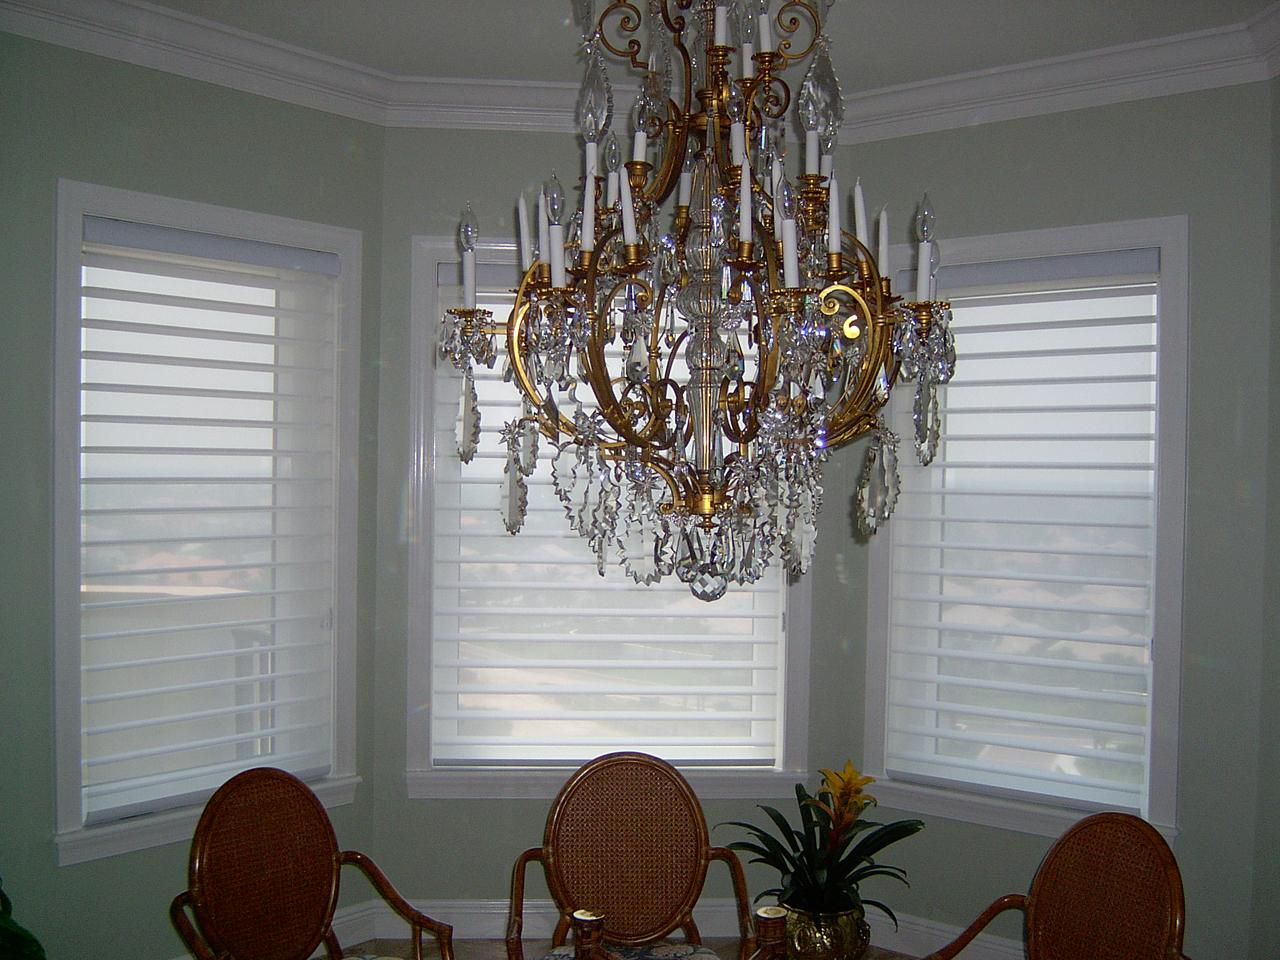 Silhouette shades on bay window in dining room